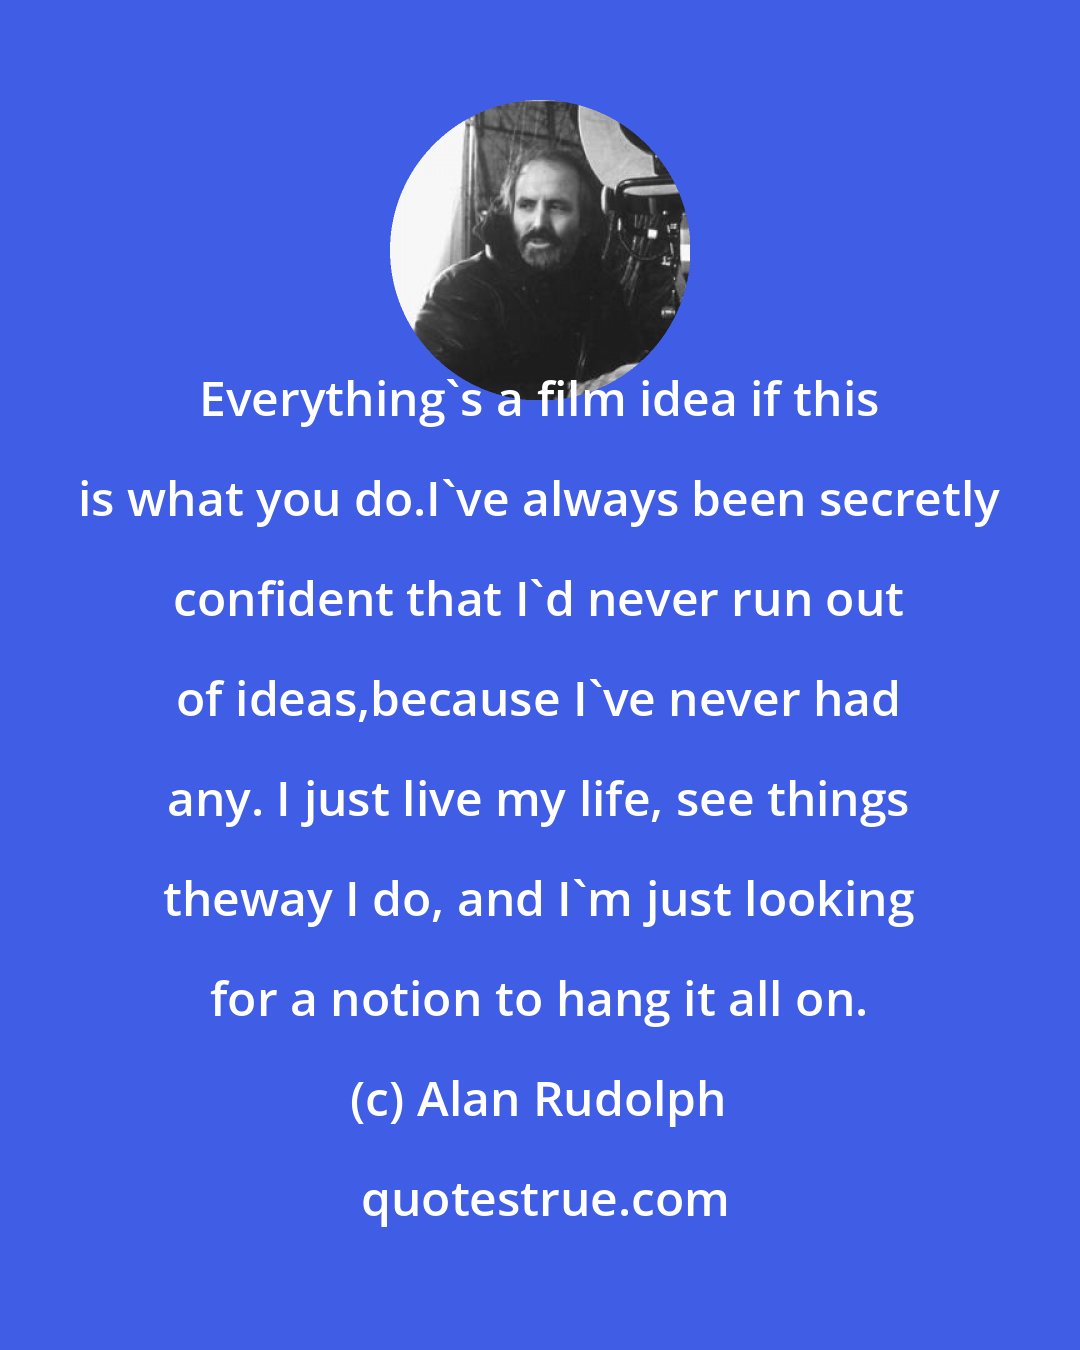 Alan Rudolph: Everything's a film idea if this is what you do.I've always been secretly confident that I'd never run out of ideas,because I've never had any. I just live my life, see things theway I do, and I'm just looking for a notion to hang it all on.